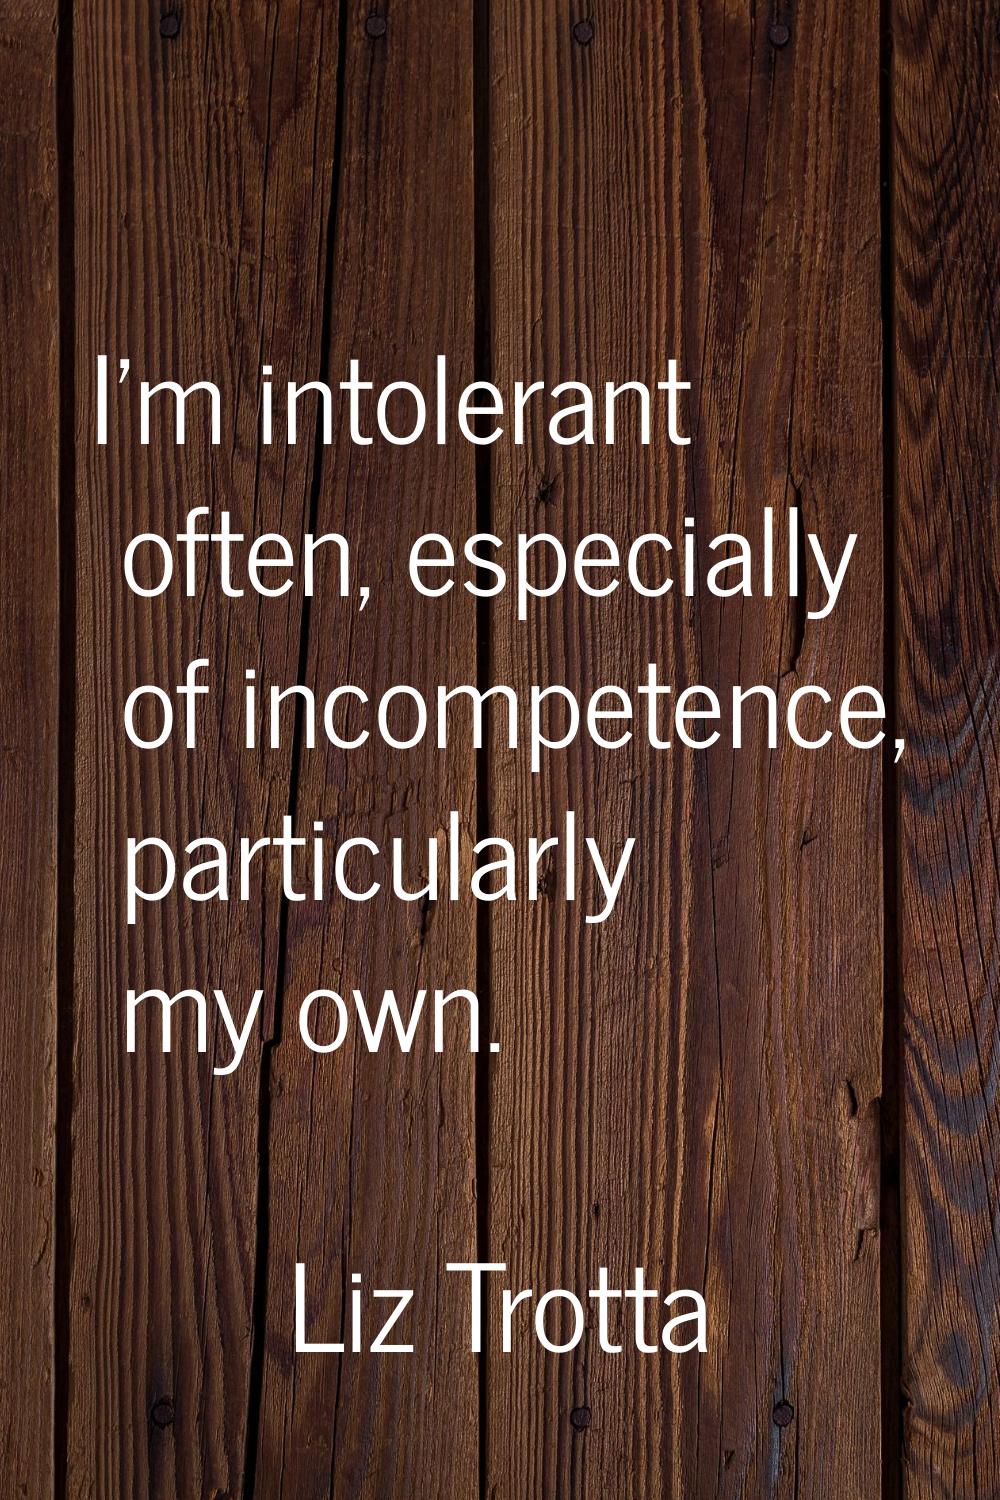 I'm intolerant often, especially of incompetence, particularly my own.